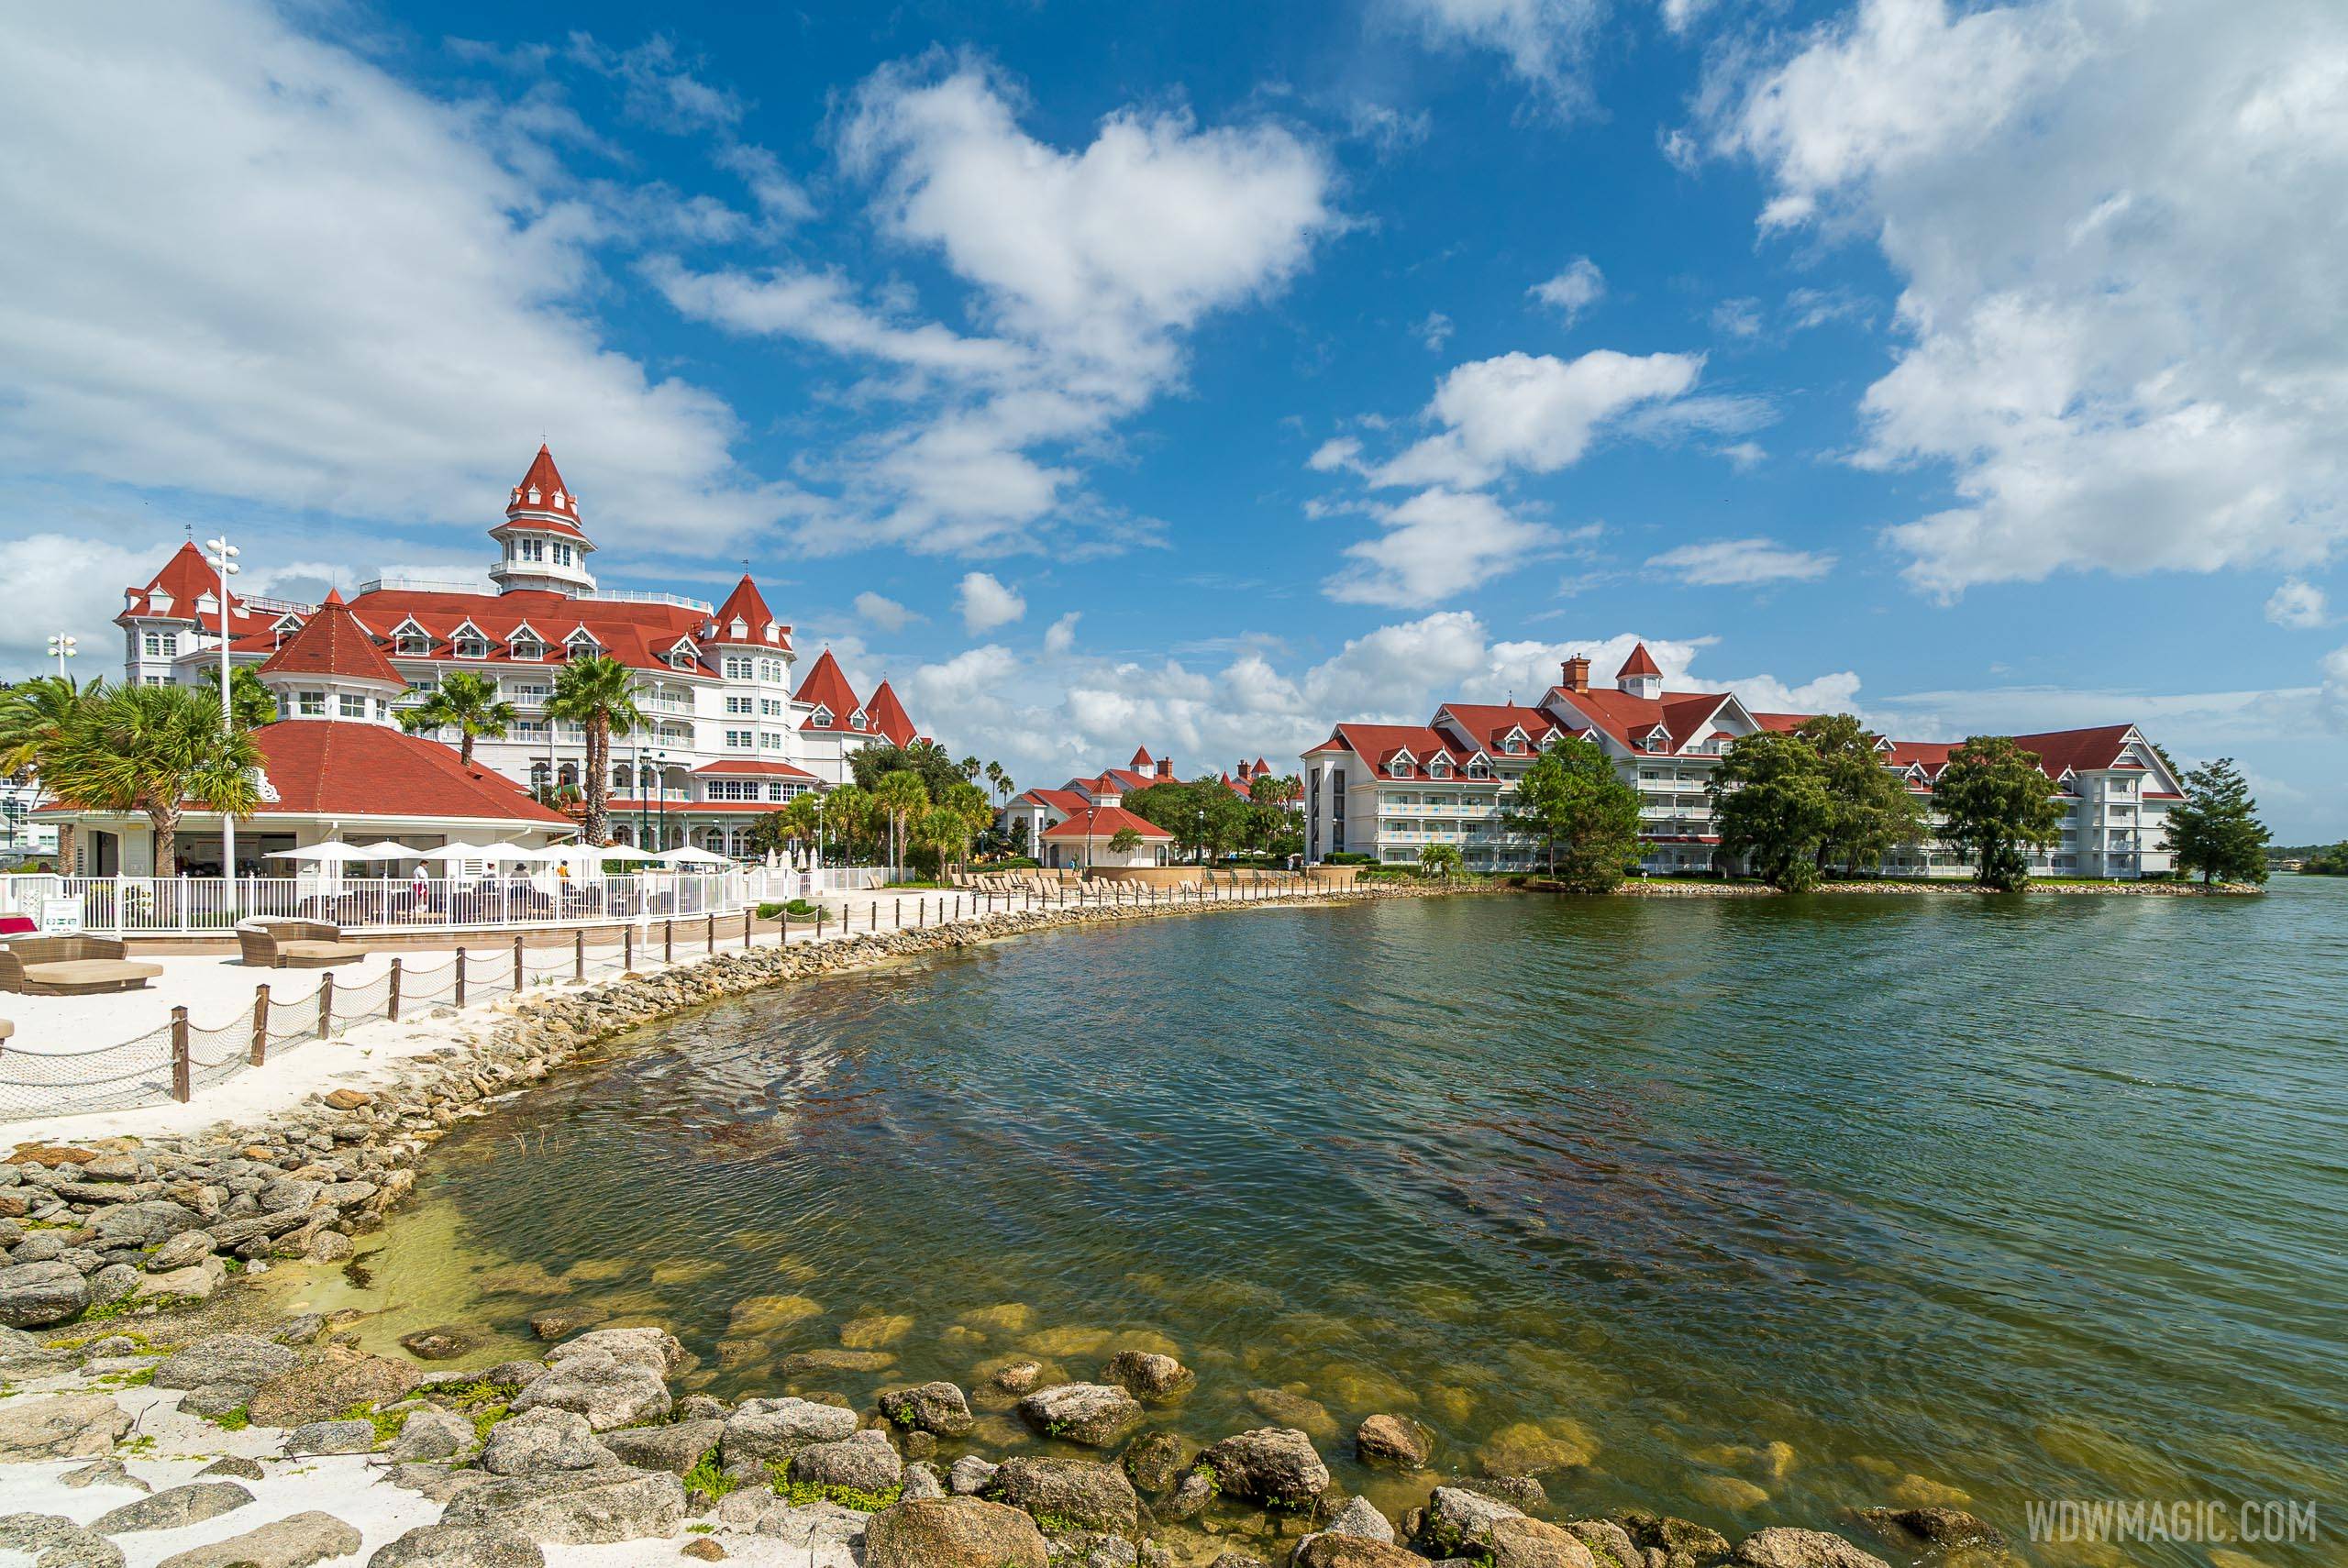 New 'Concierge Club Connection' being tested at Disney's Grand Floridian Resort